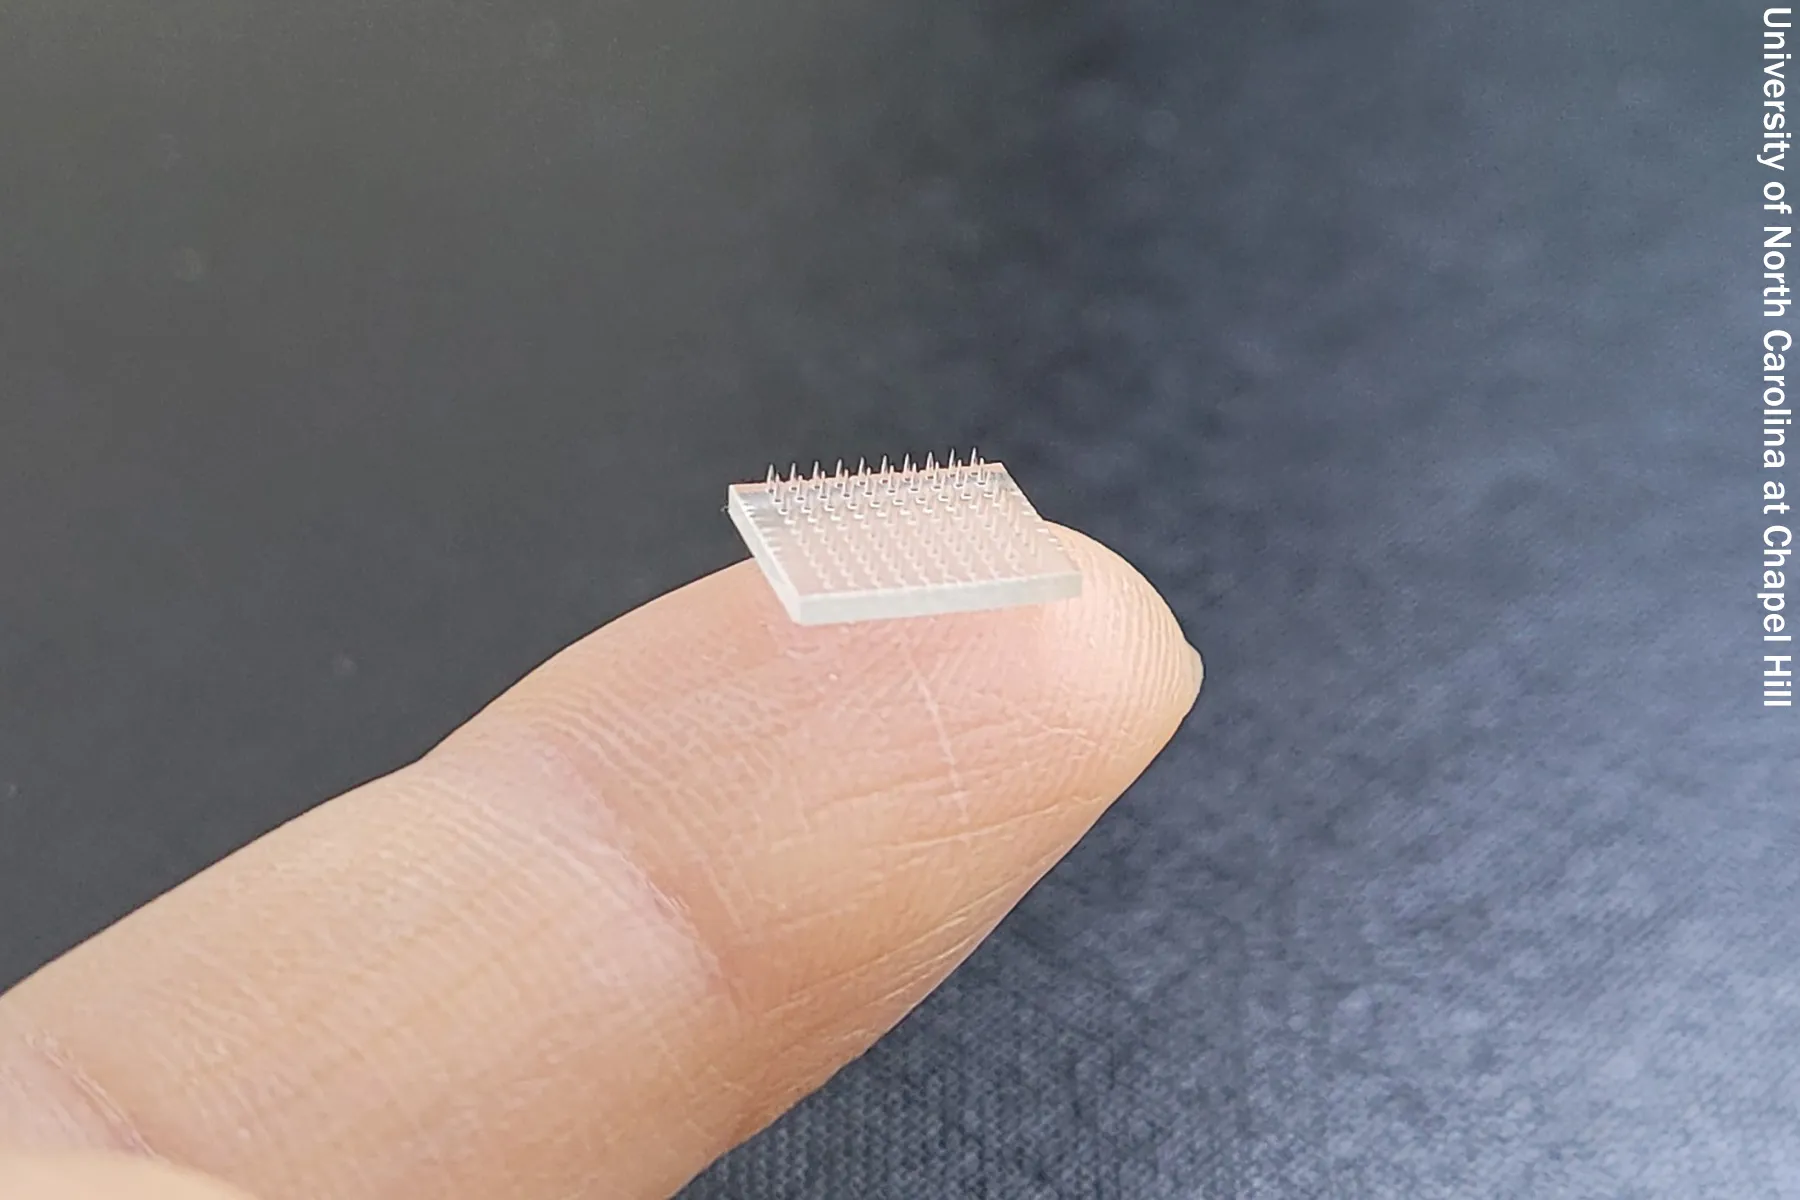 Scientists Use 3D Printing to Create Injection-Free Vaccine Patch